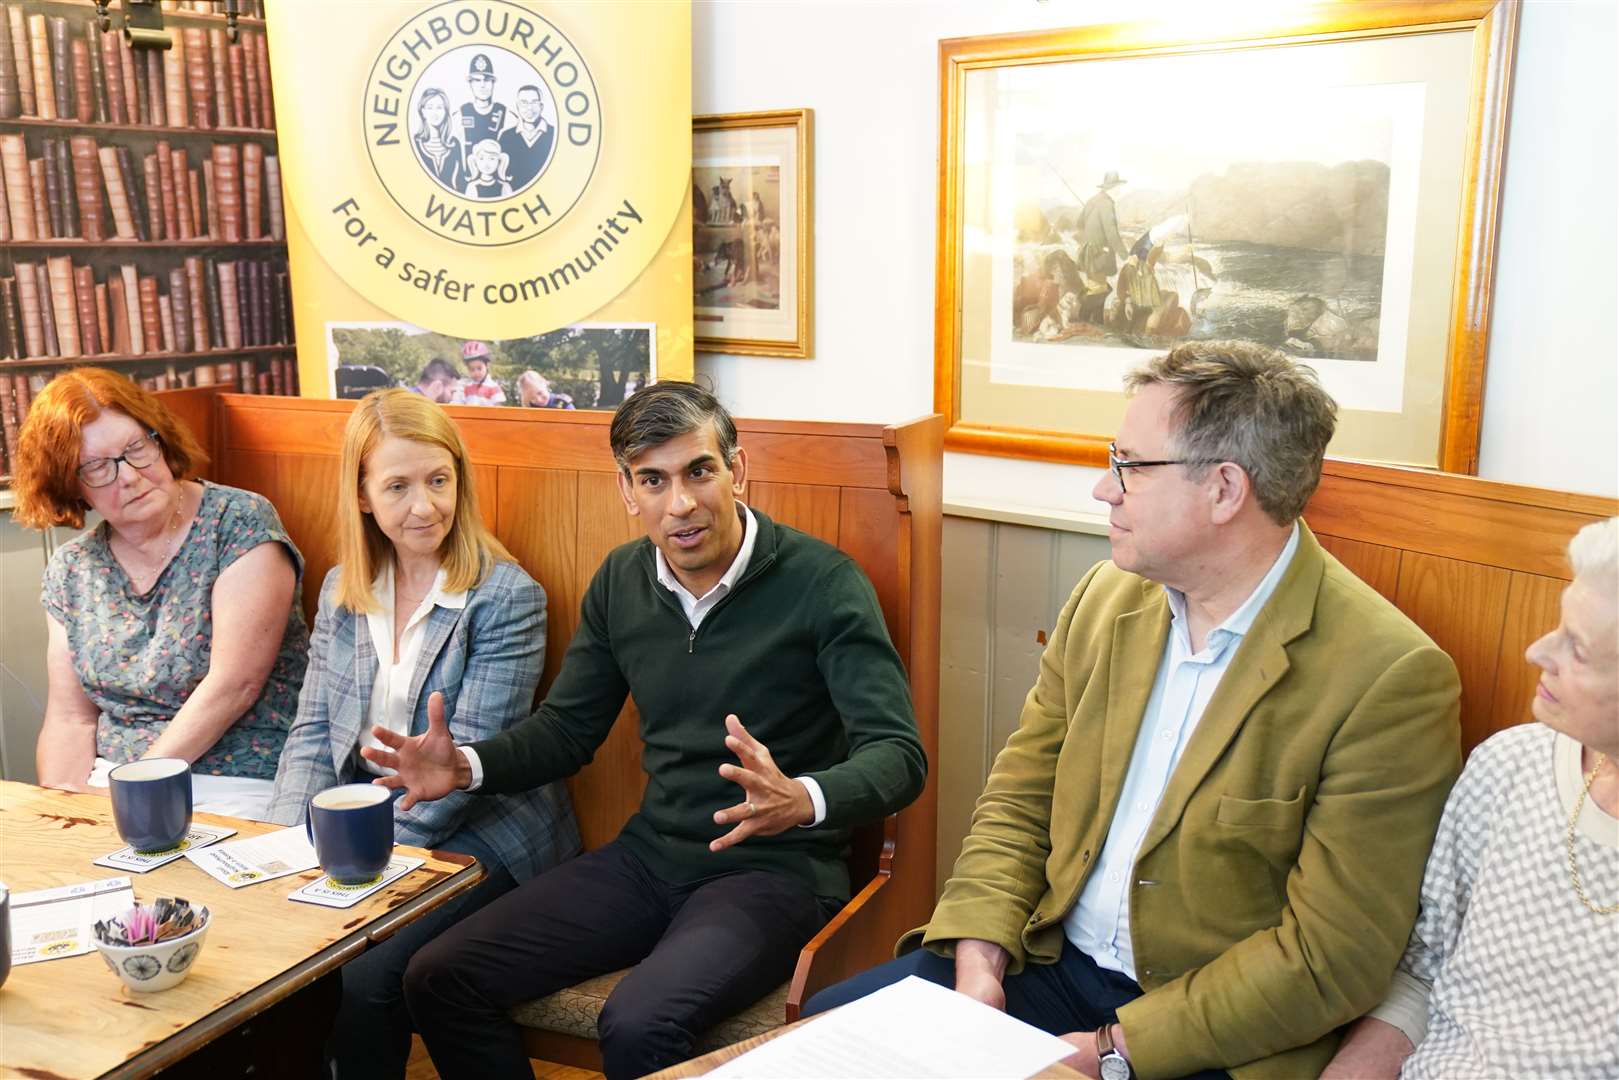 Prime Minister Rishi Sunak attends a Neighbourhood Watch meeting at the Dog and Bacon pub in Horsham, West Sussex, while on the General Election campaign trail (Gareth Fuller/PA)